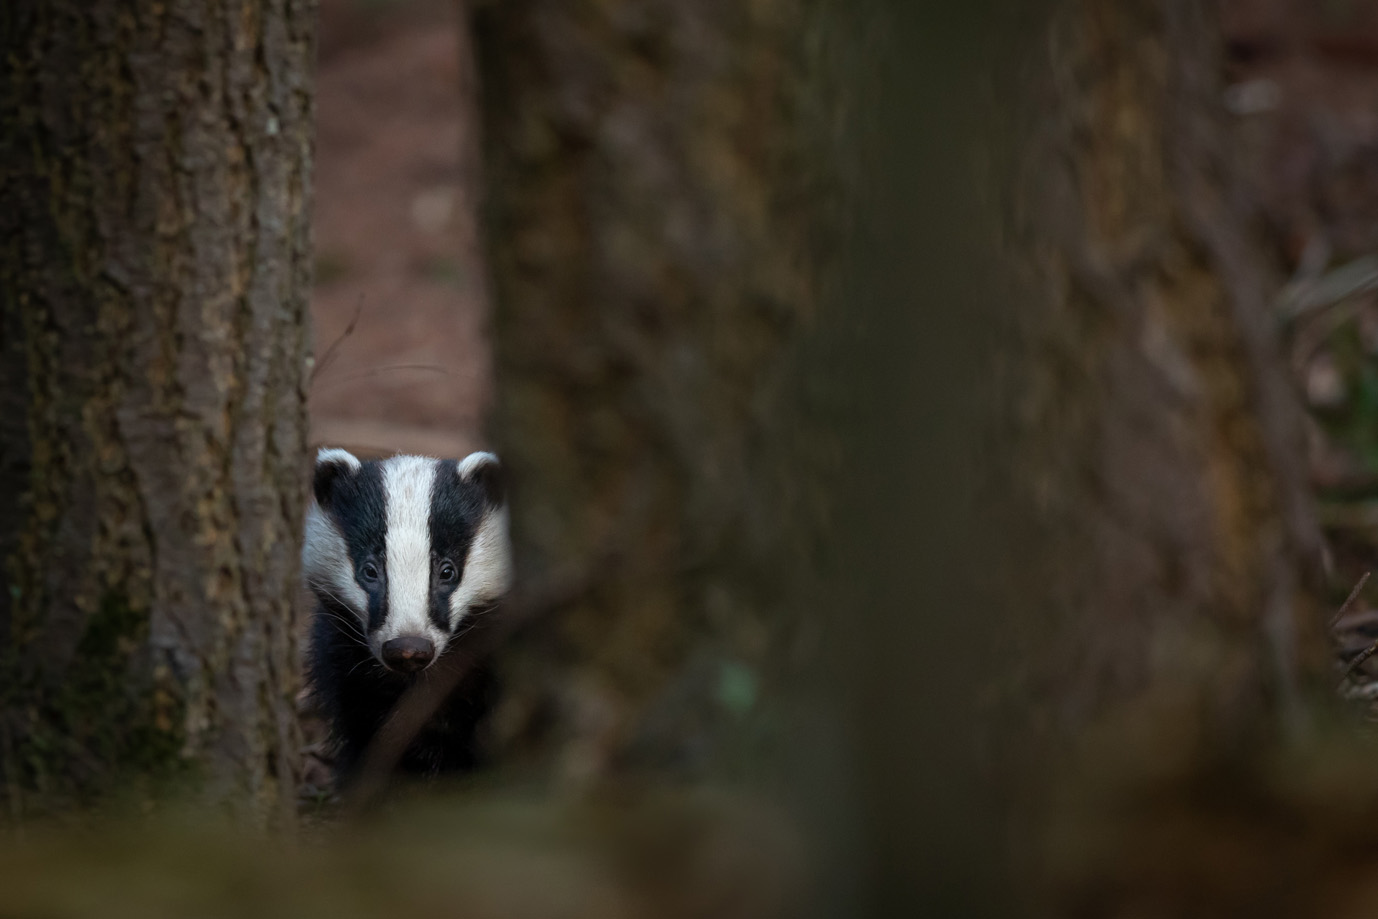 Animal Folklore: Badger Folktales From Around the World